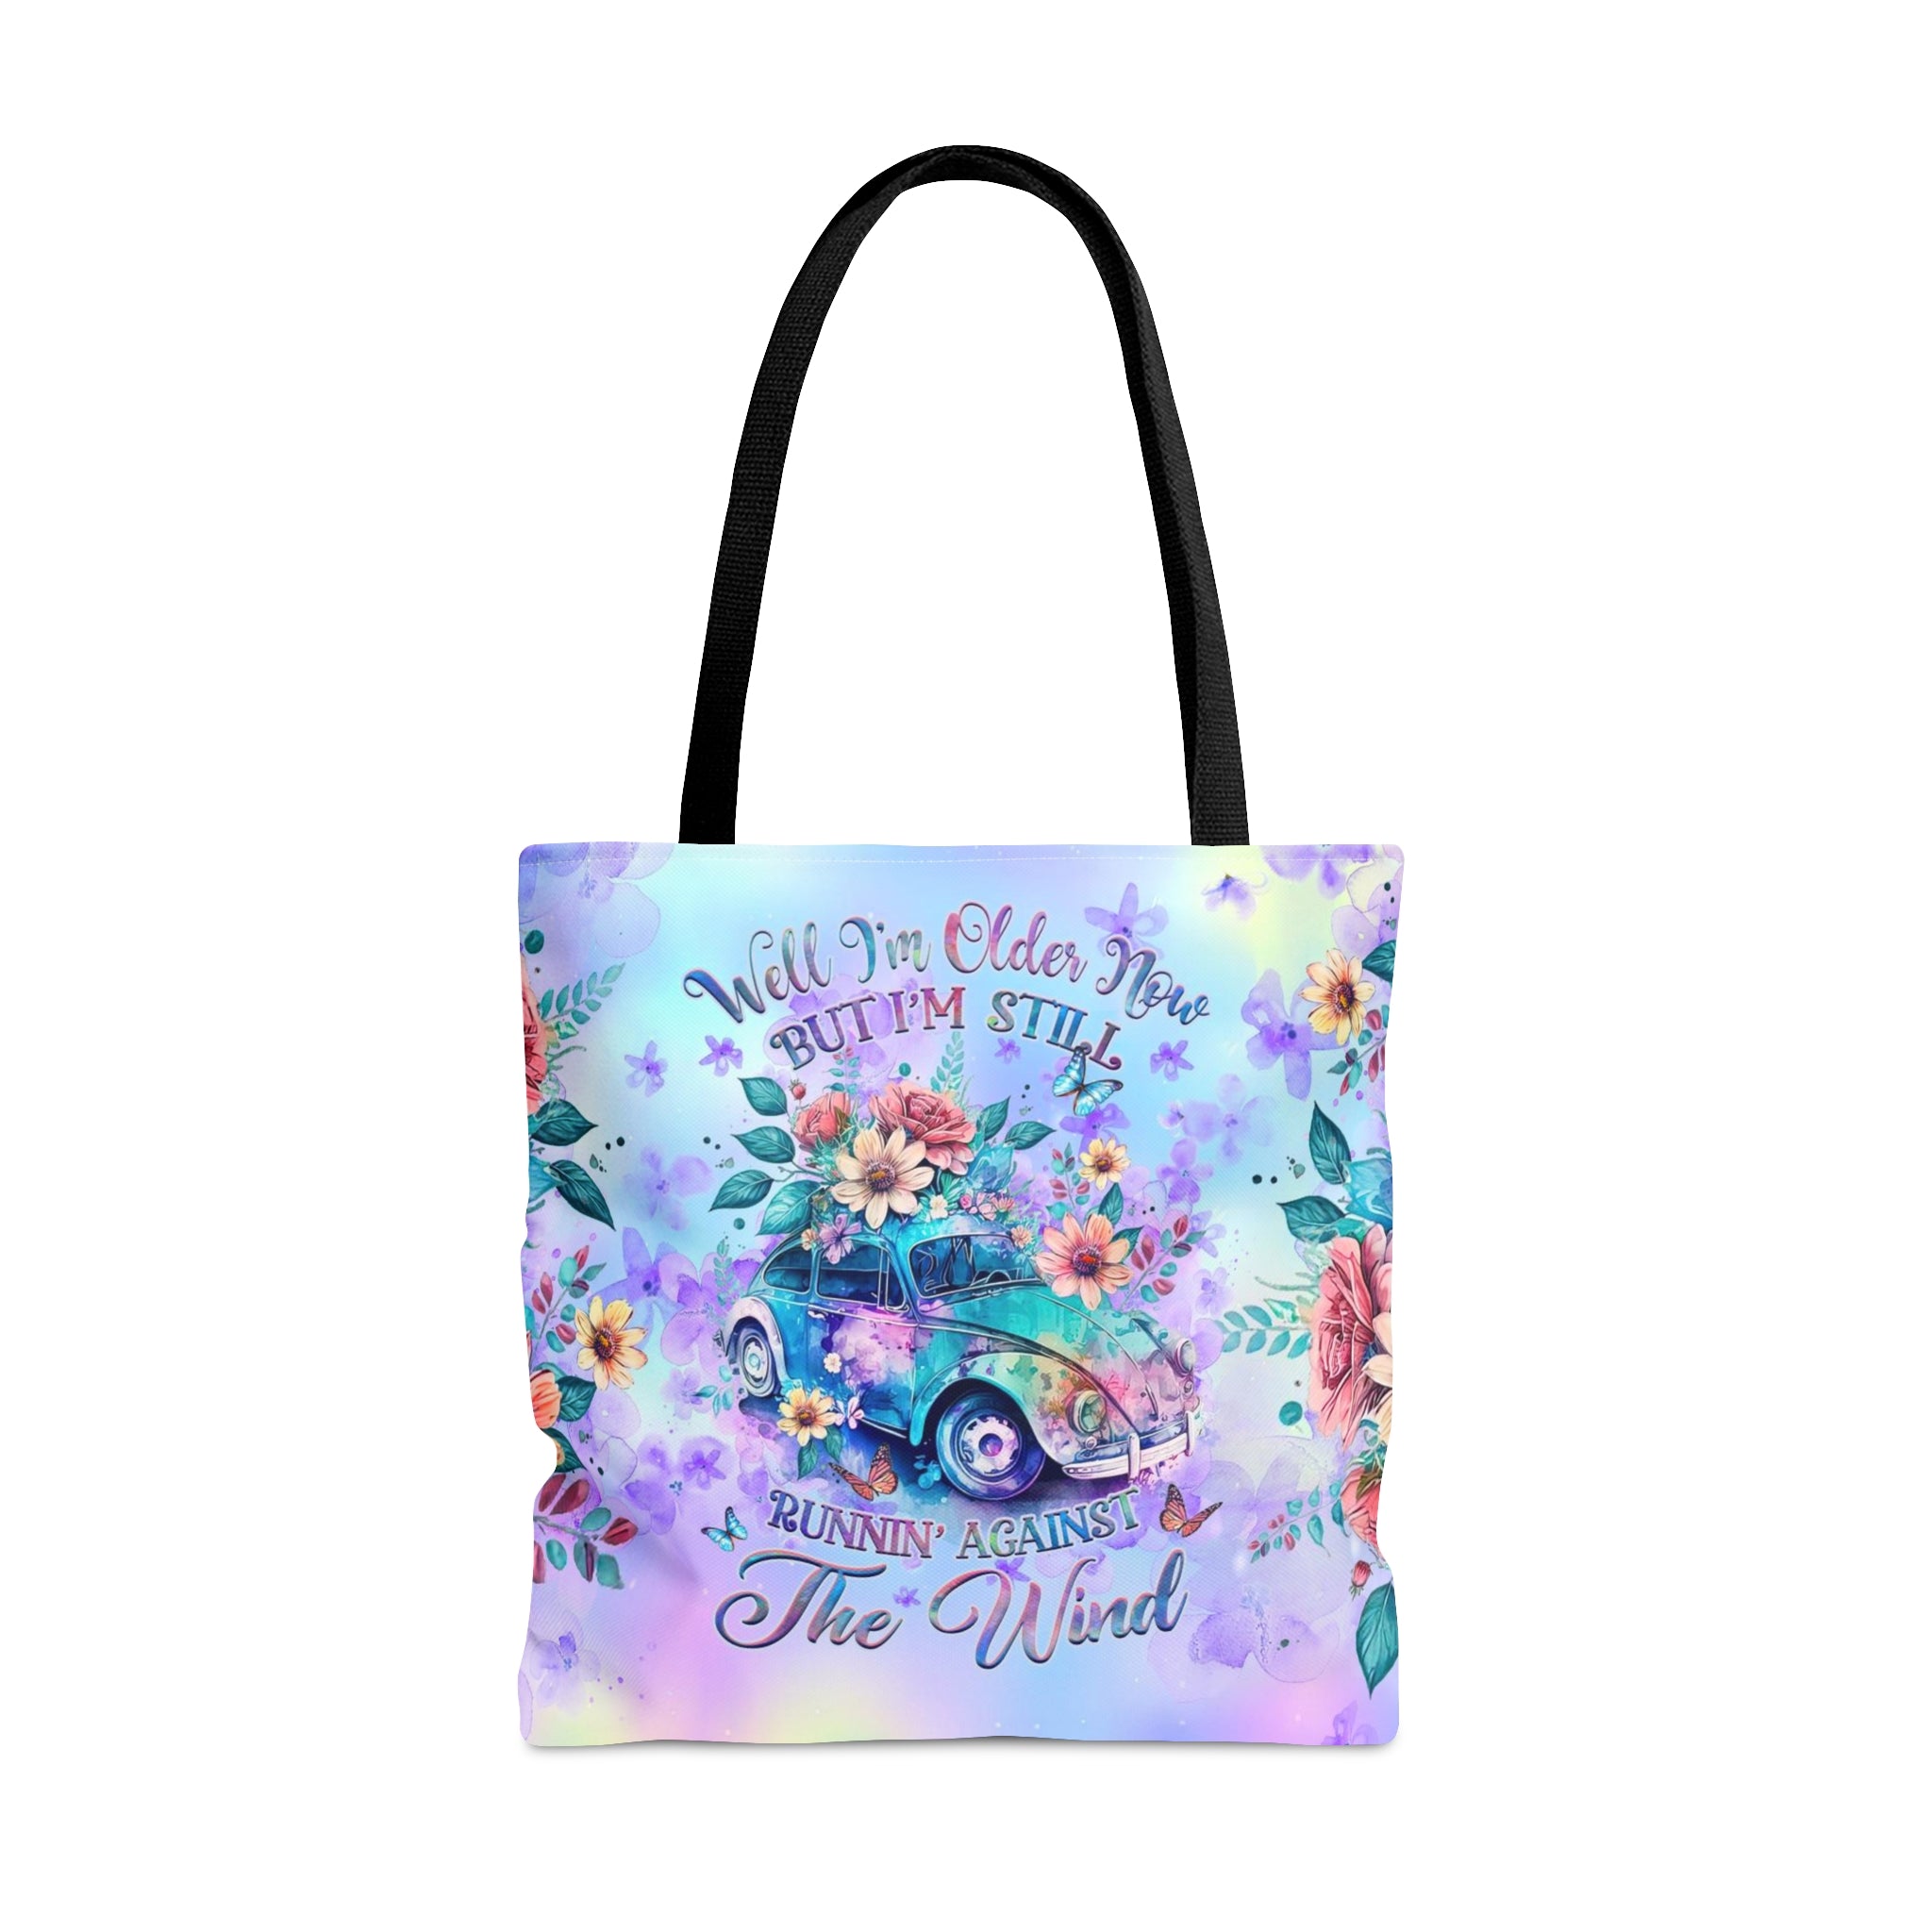 RUNNING AGAINST THE WIND TOTE BAG - YHHG0410232